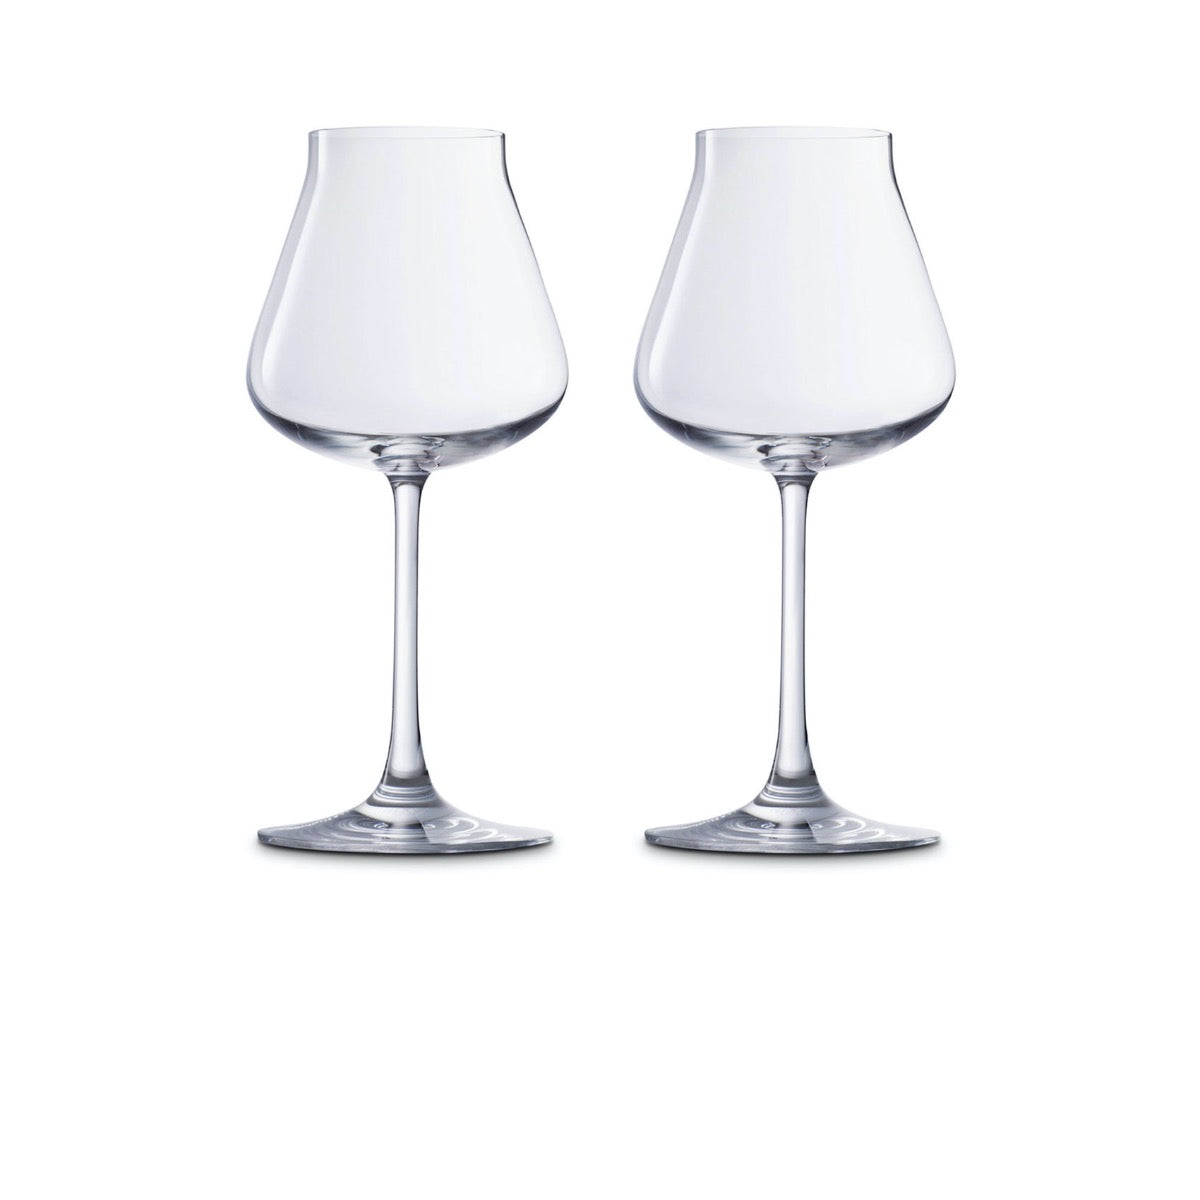 Pair of red wine glasses